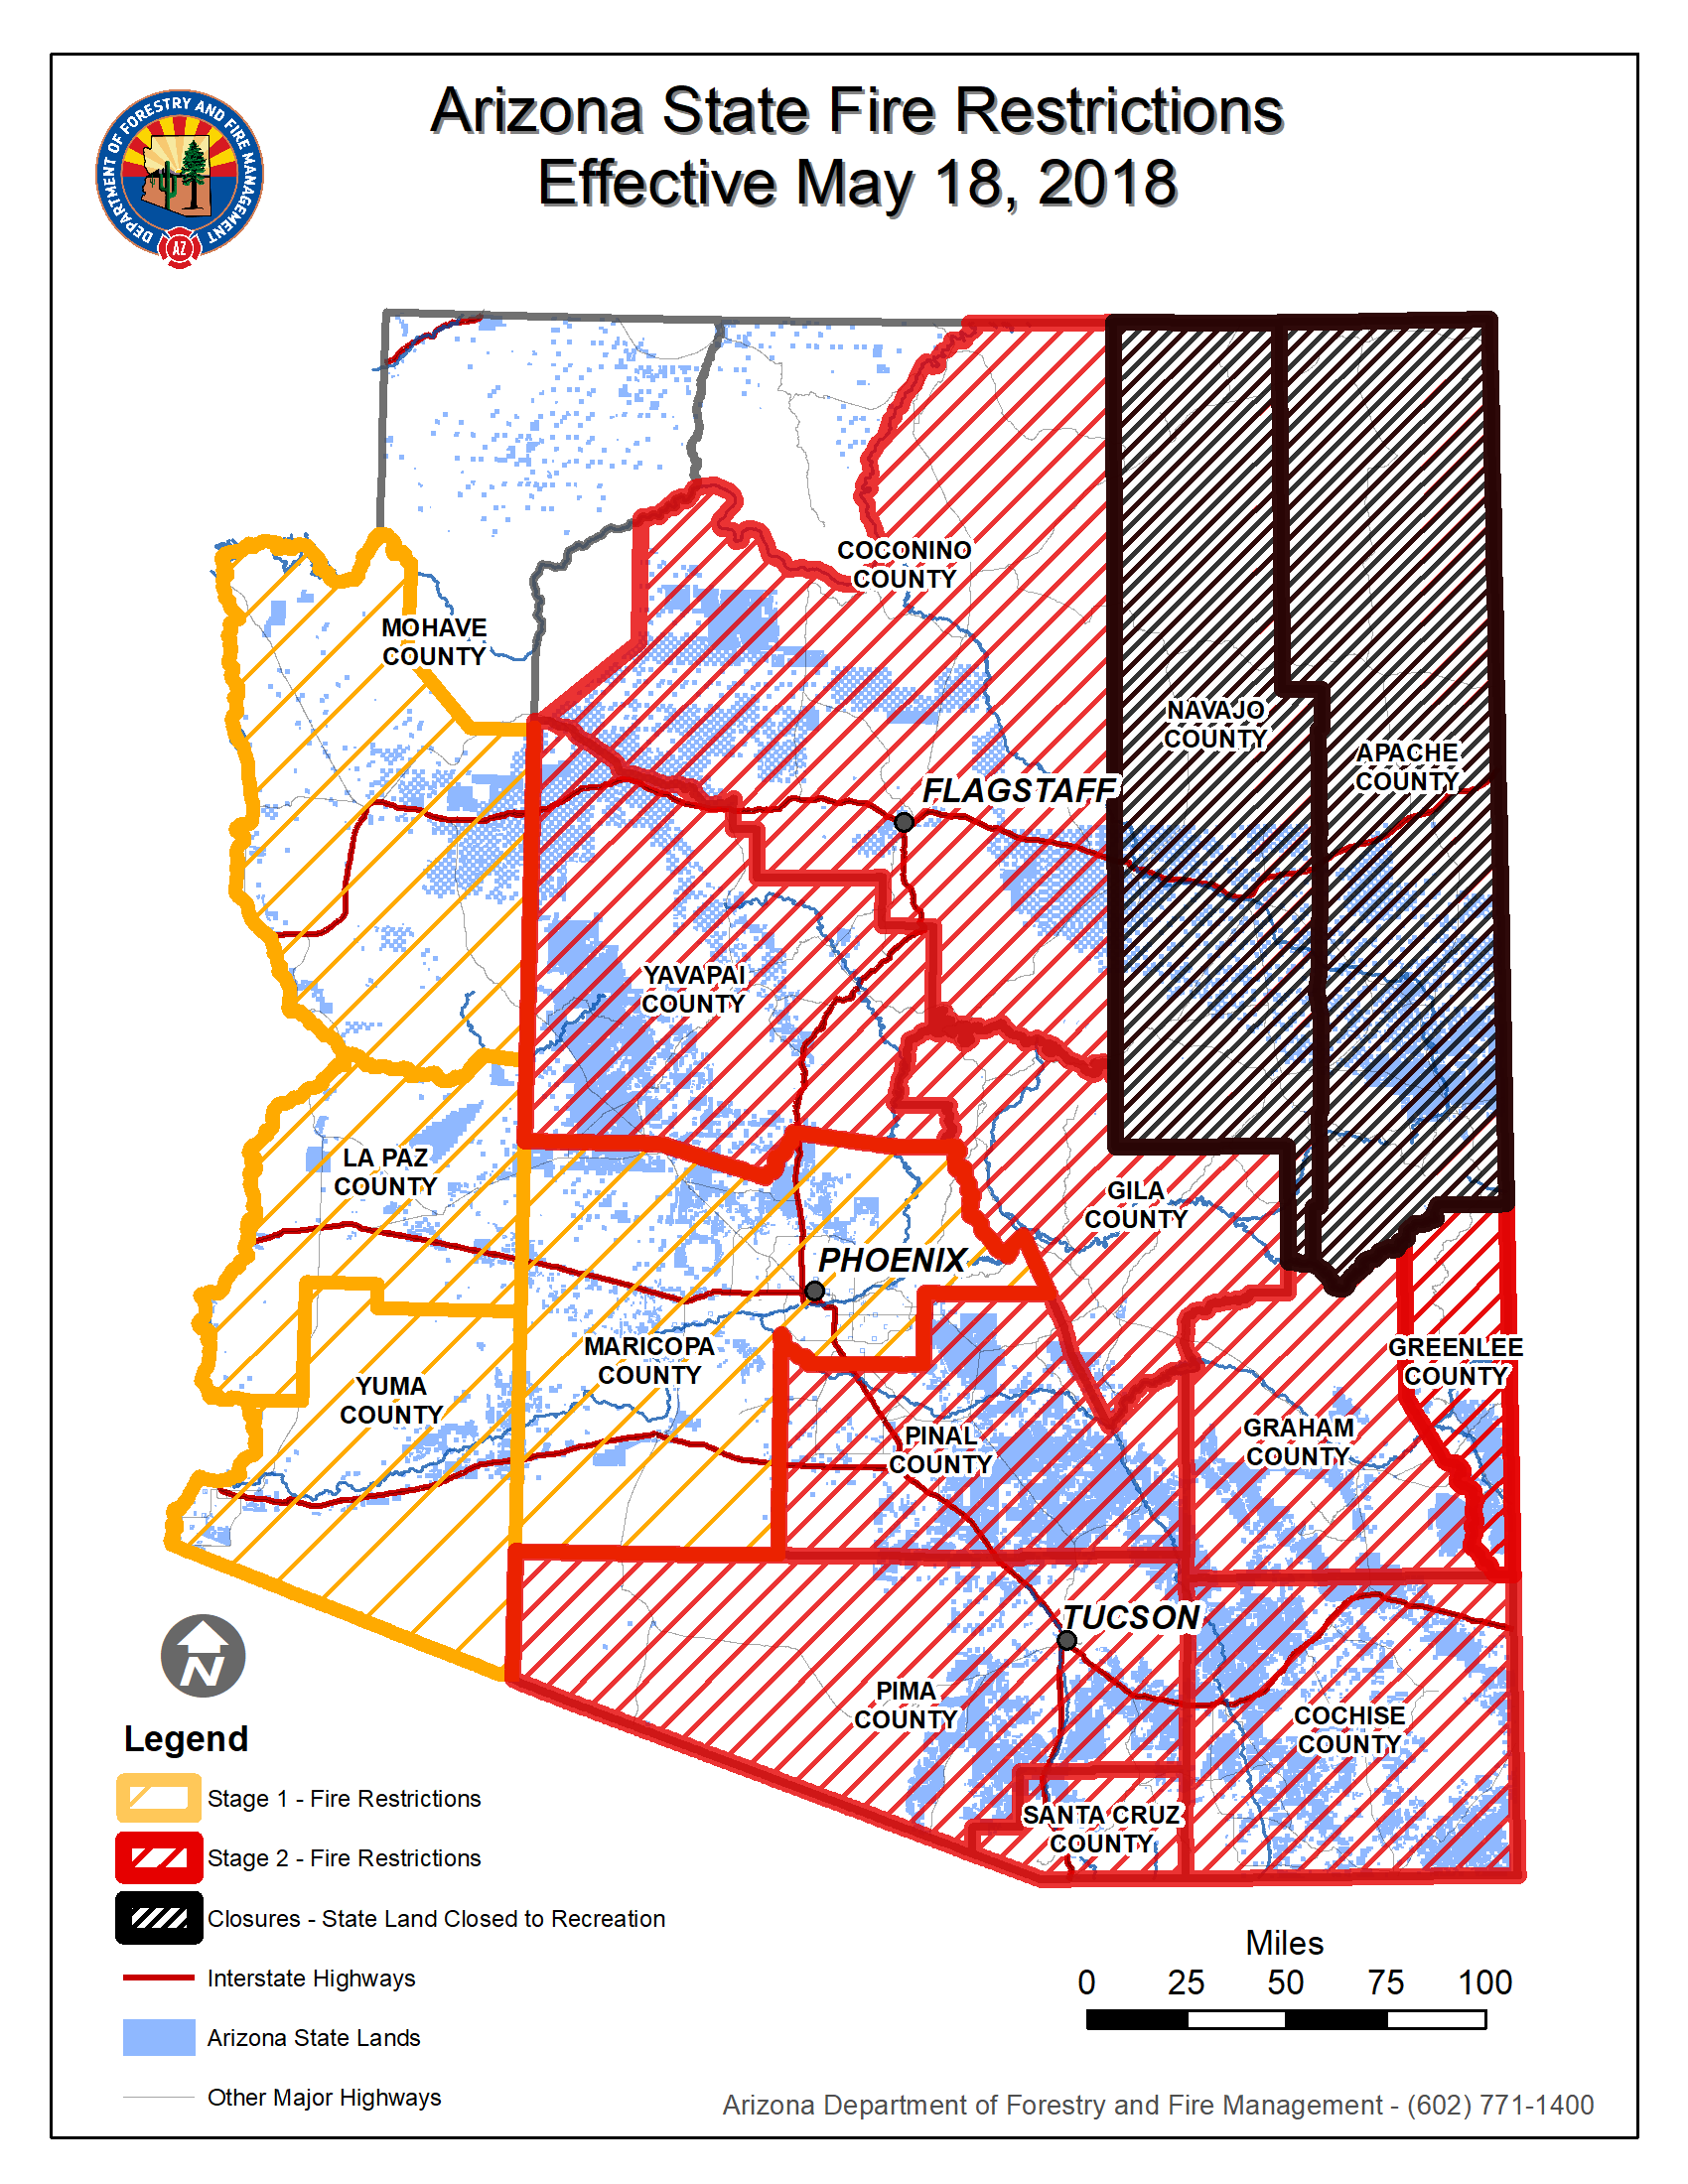 AZ Fire Restrictions - May 18, 2018